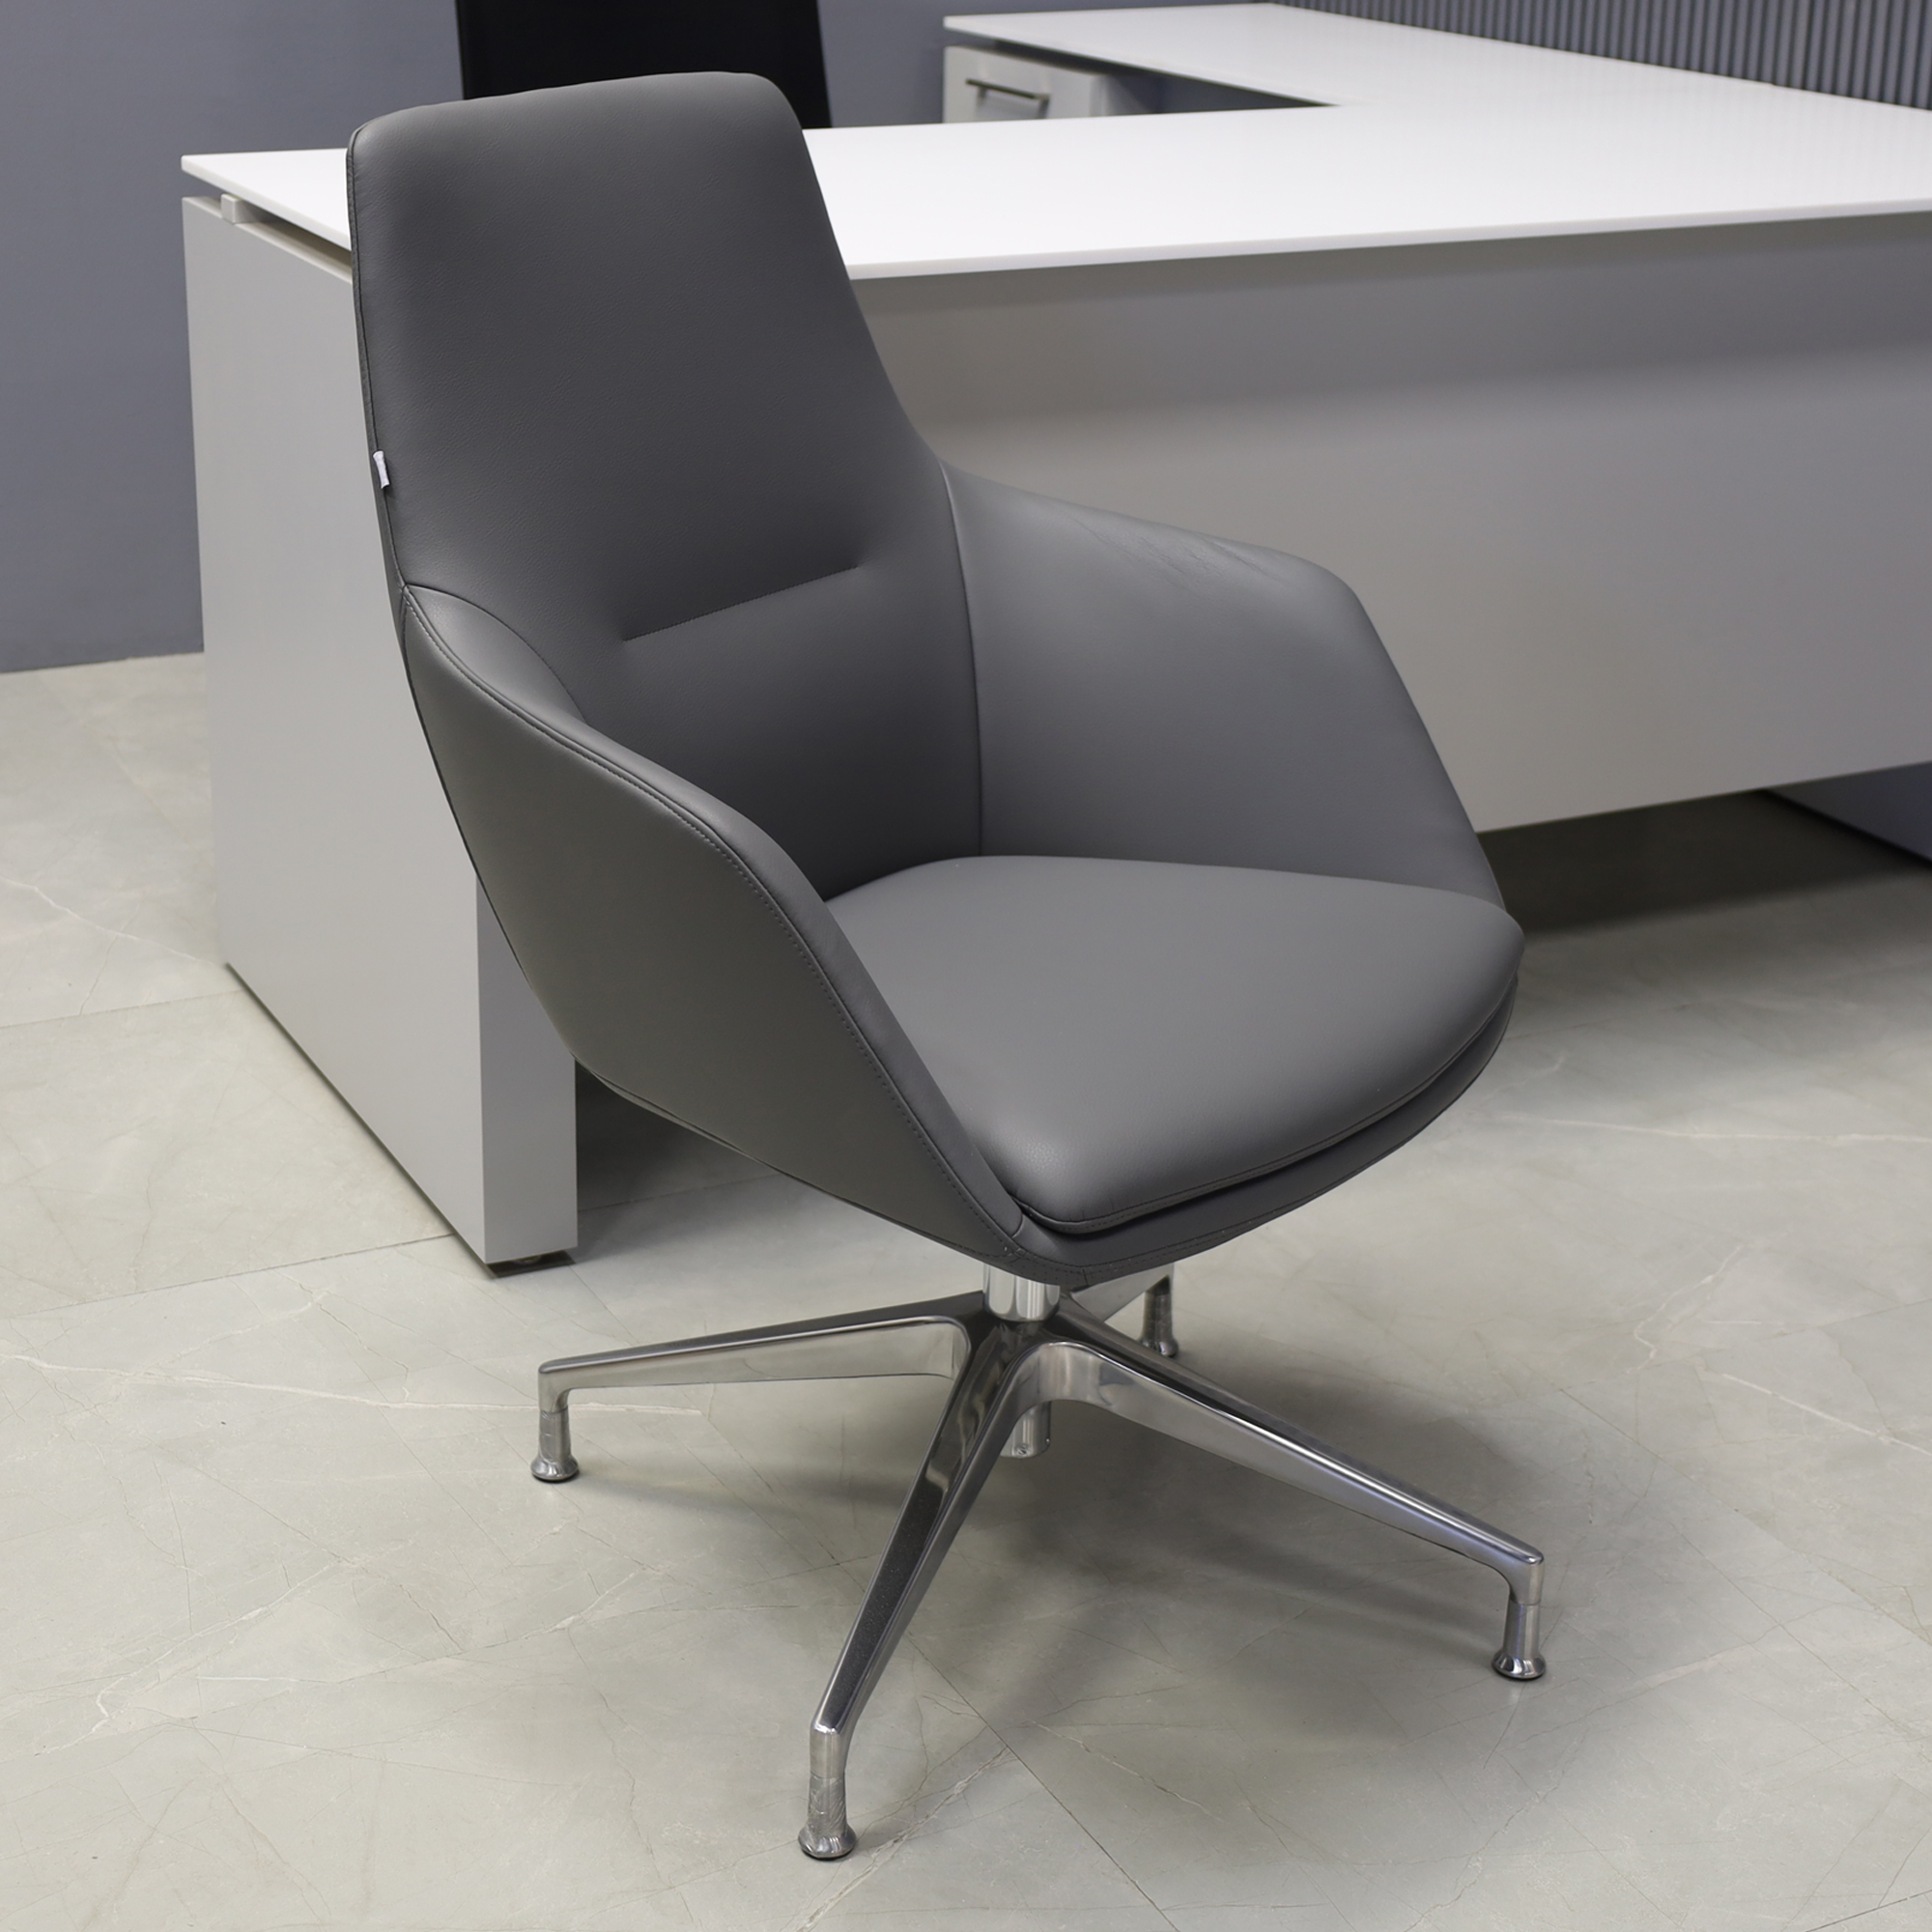 Silla Guest and Lobby Chair in gray leatherette, shown here.